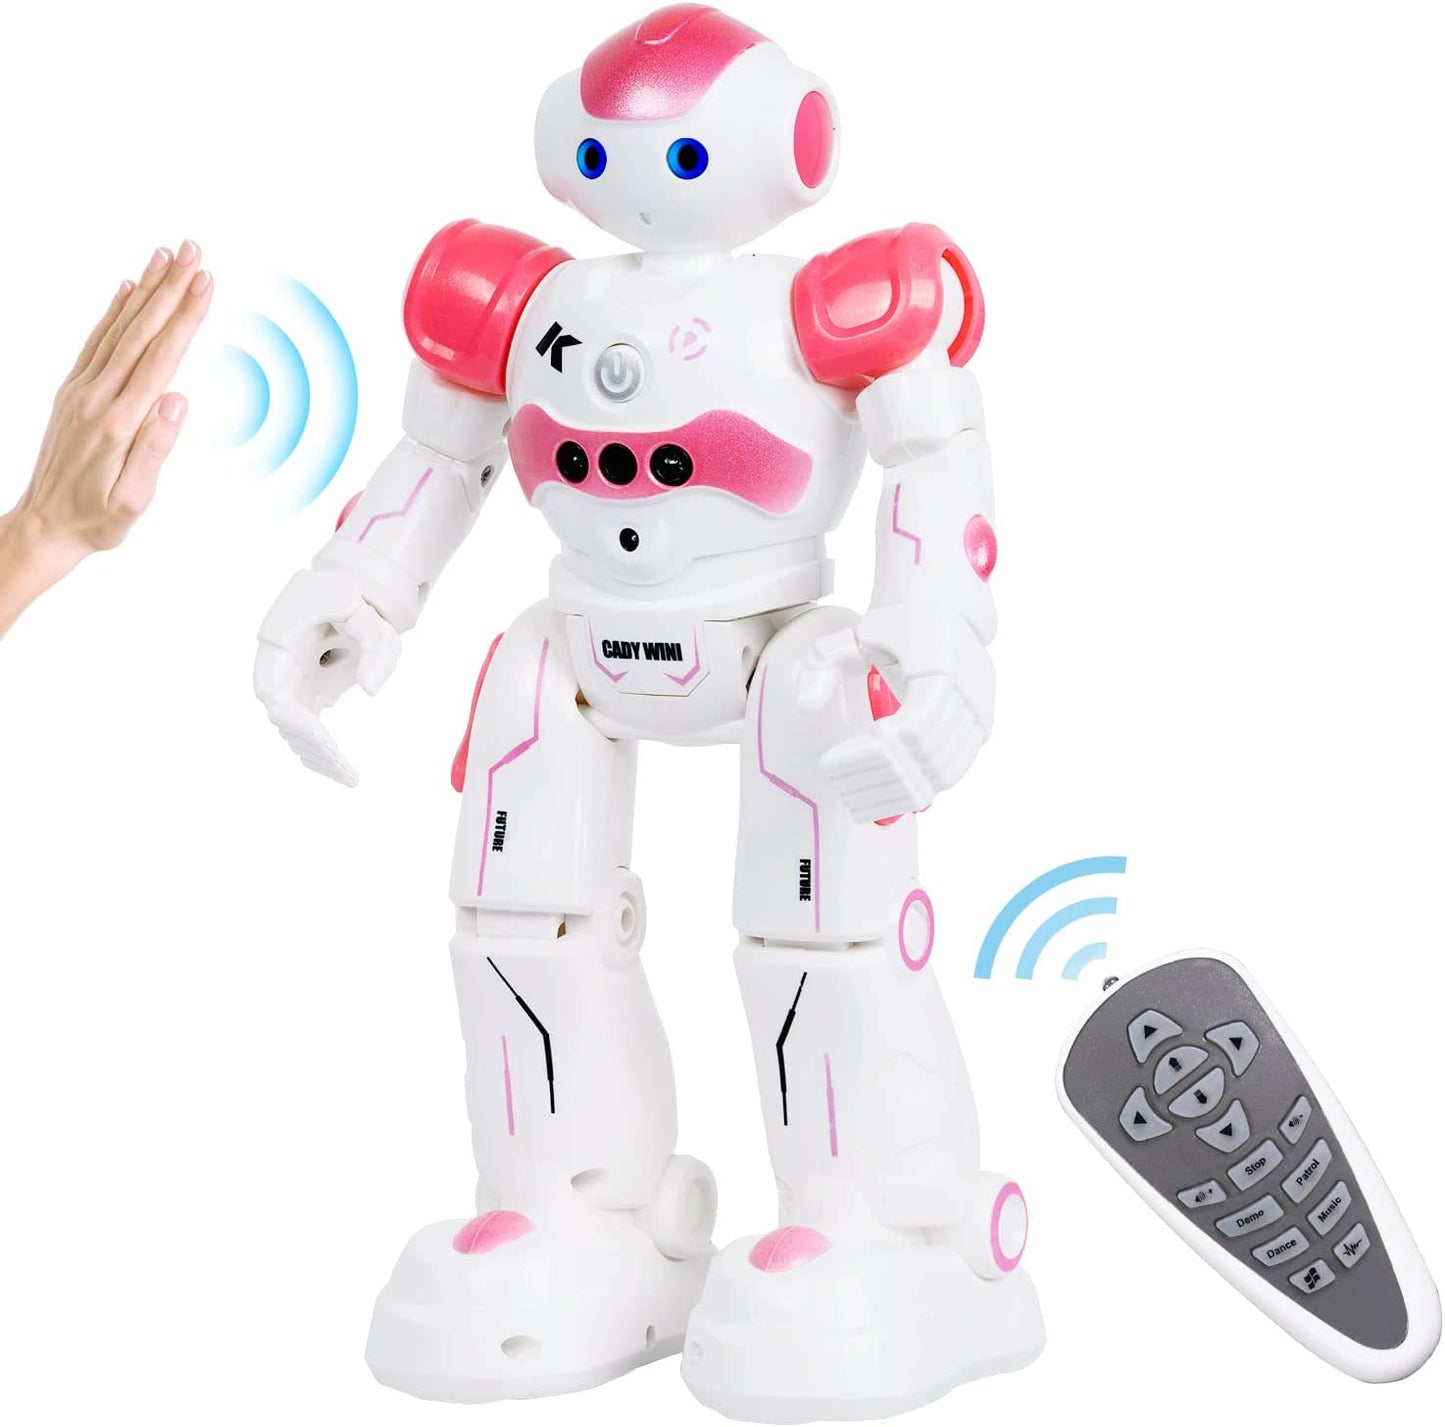 RC Robot Toy with Remote Control for Kids